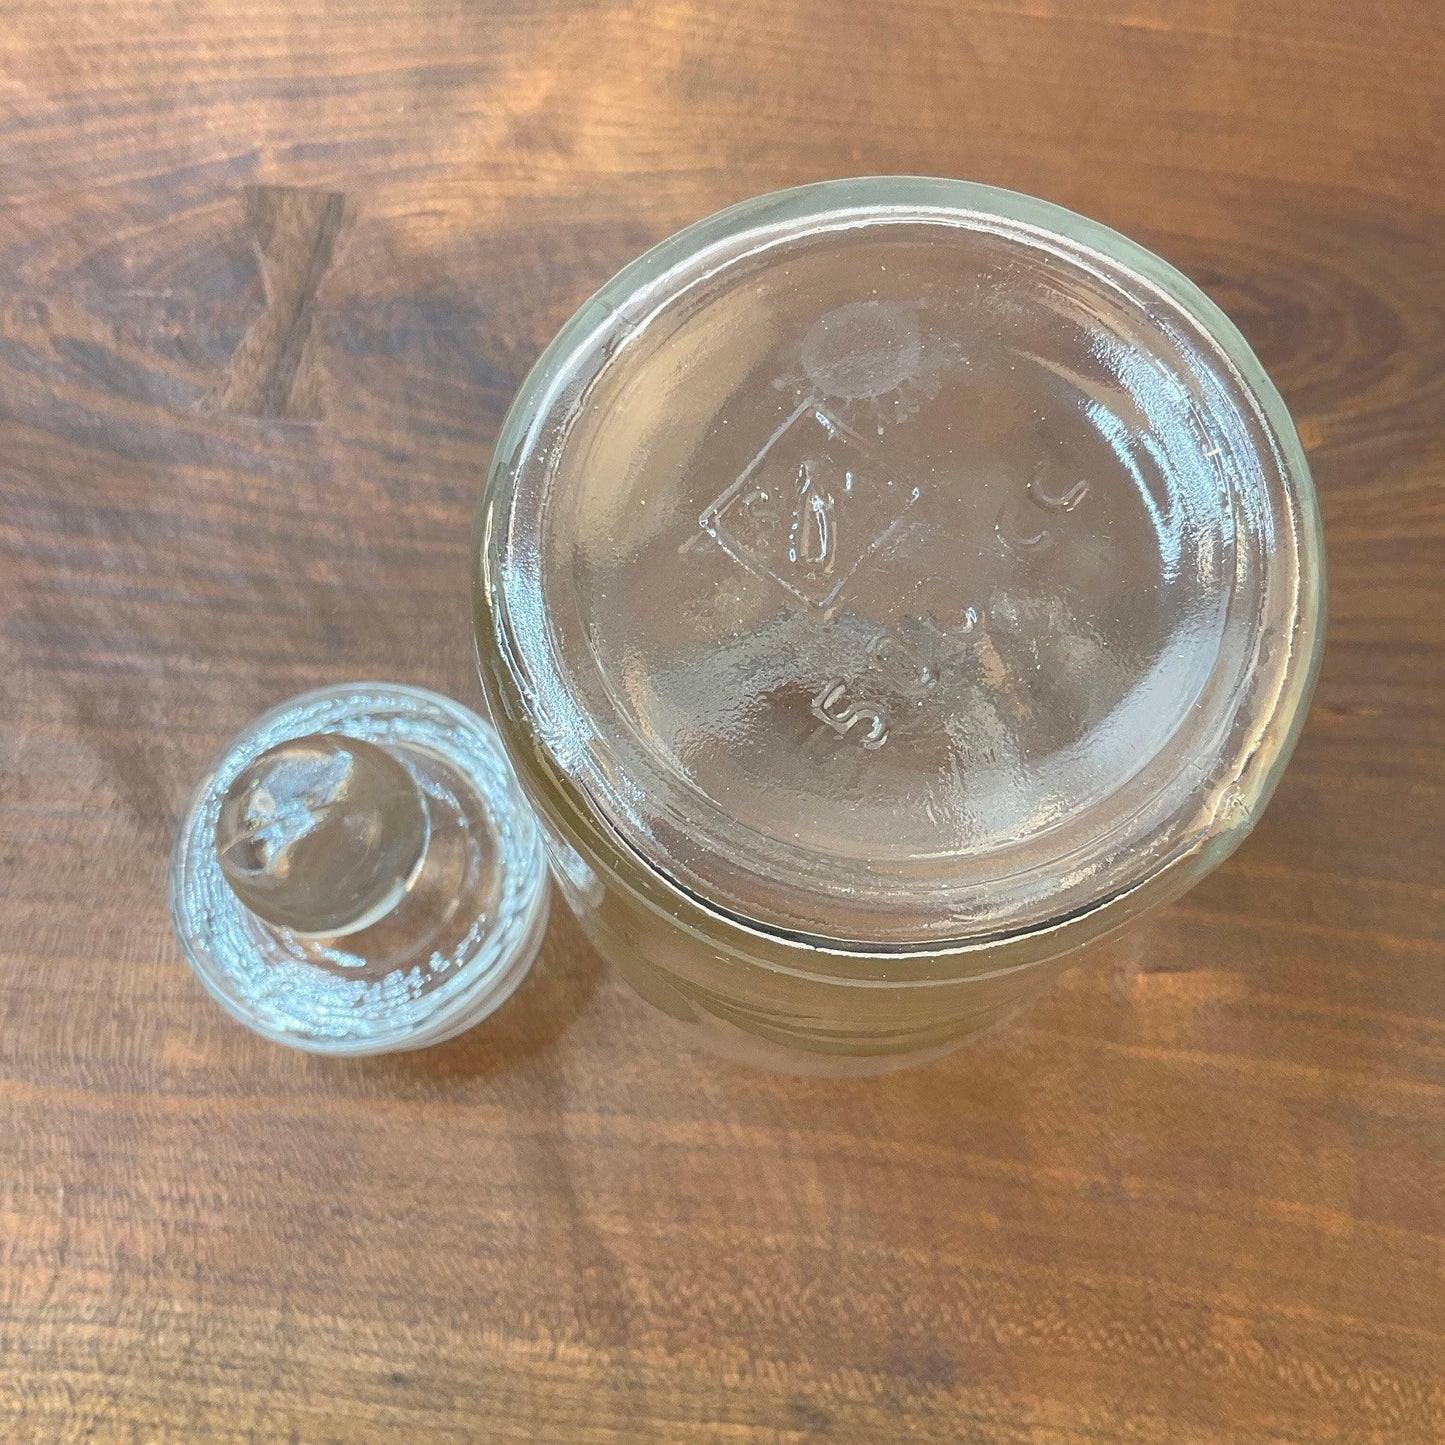 Cannabis Apothecary Jar - Offensively Domestic